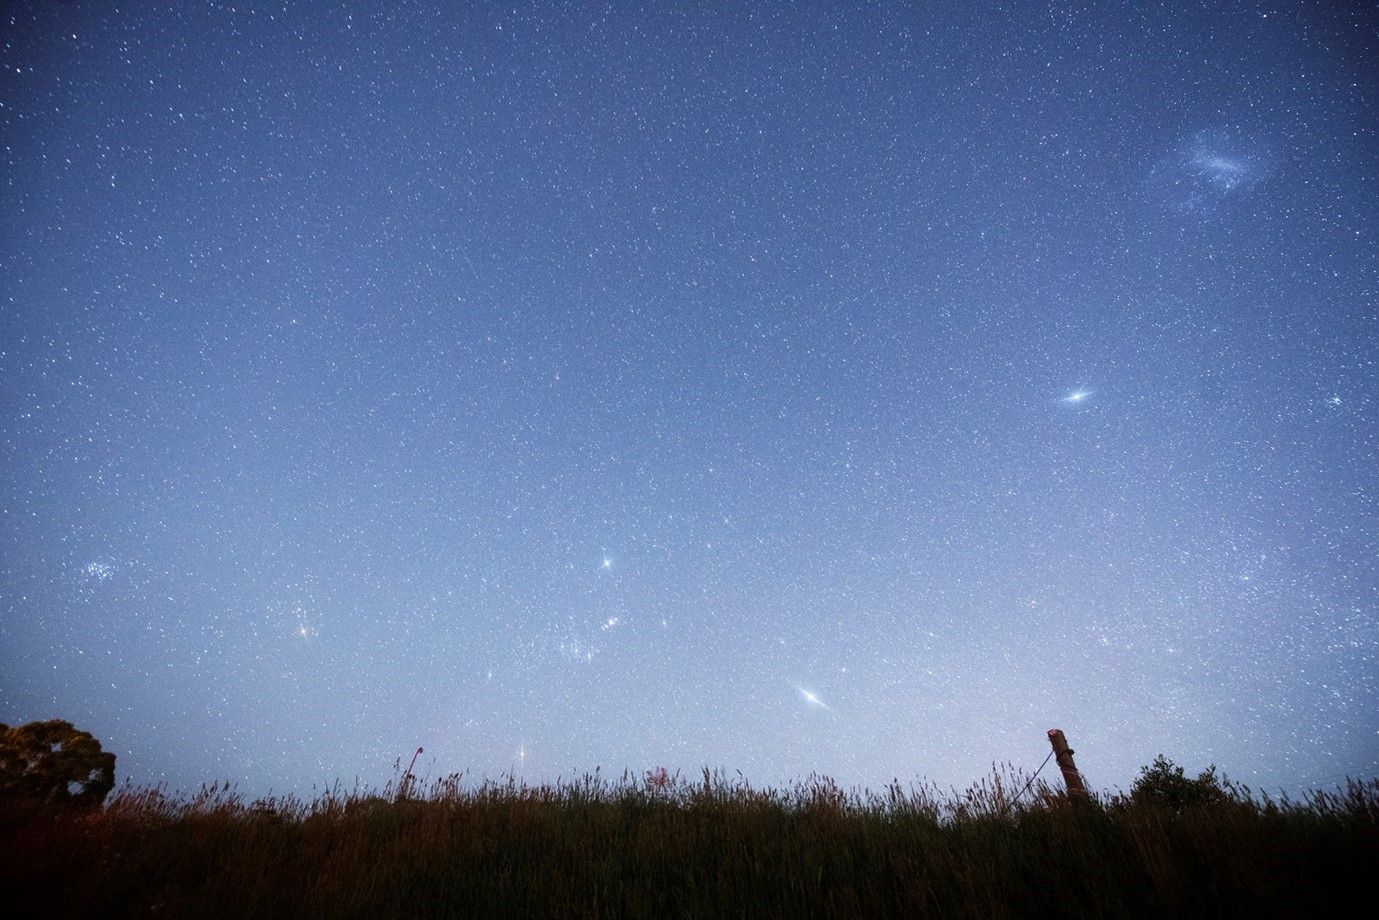 Orion rising in the night sky